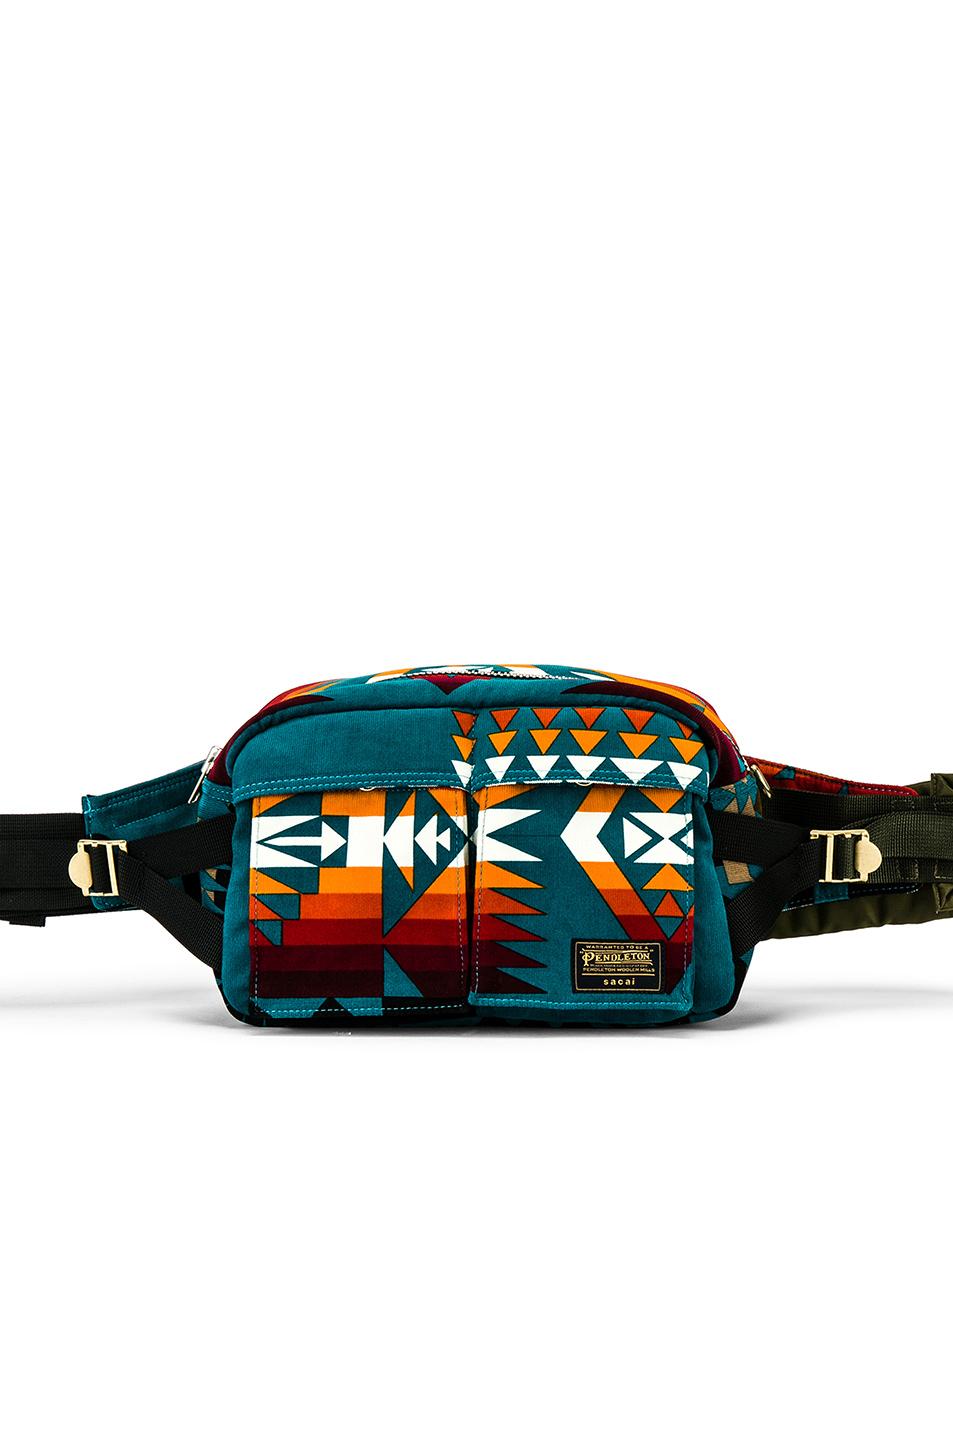 Sacai Pendleton Fanny Pack in Blue for Men - Lyst